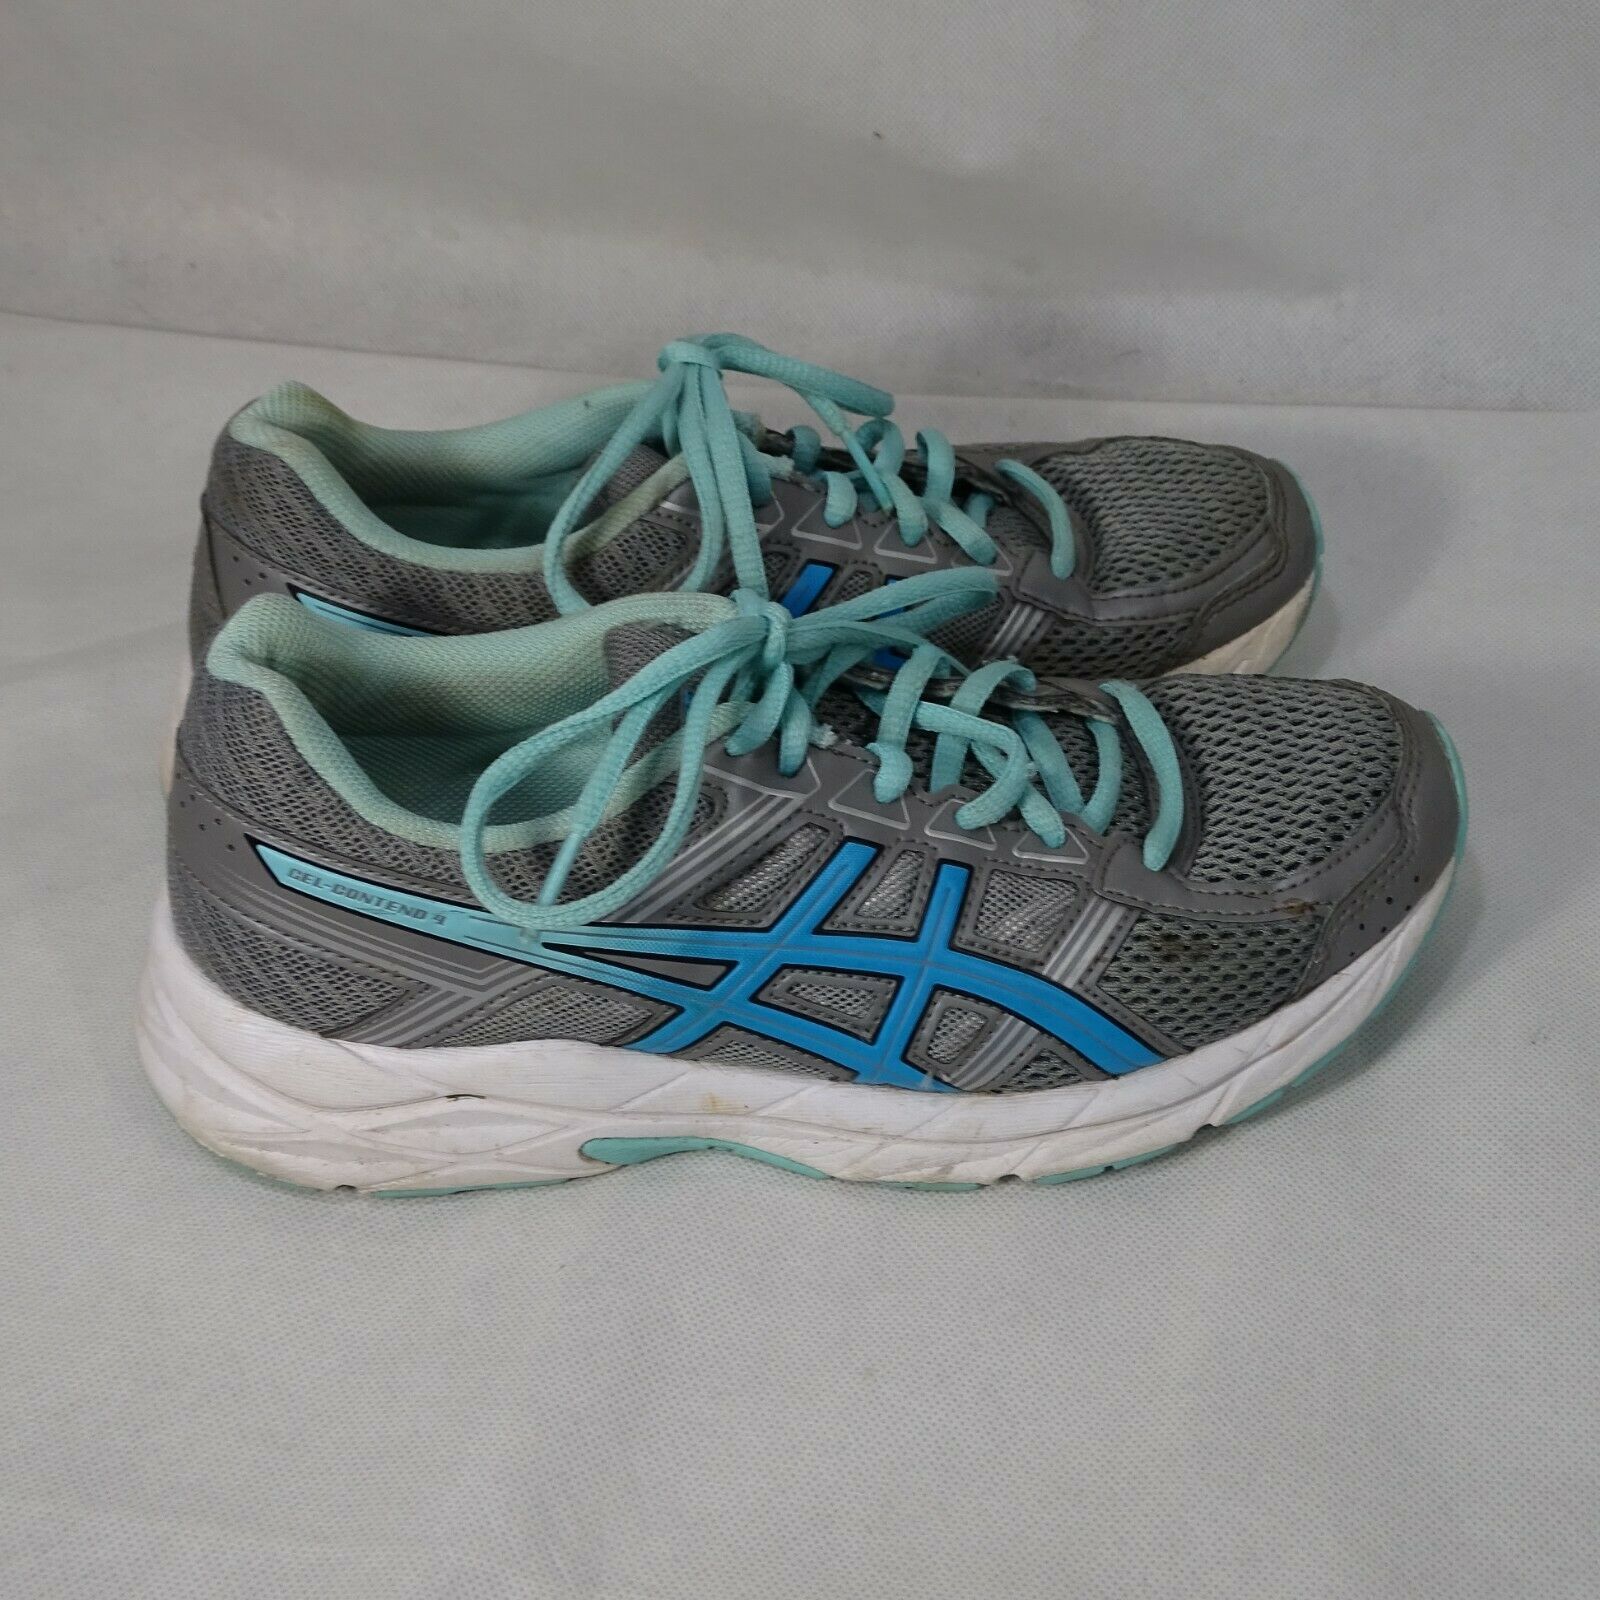 Asics Gel-Contend 4 Ortholite Sneakers Shoes Women Size 7 Gray Blue ...